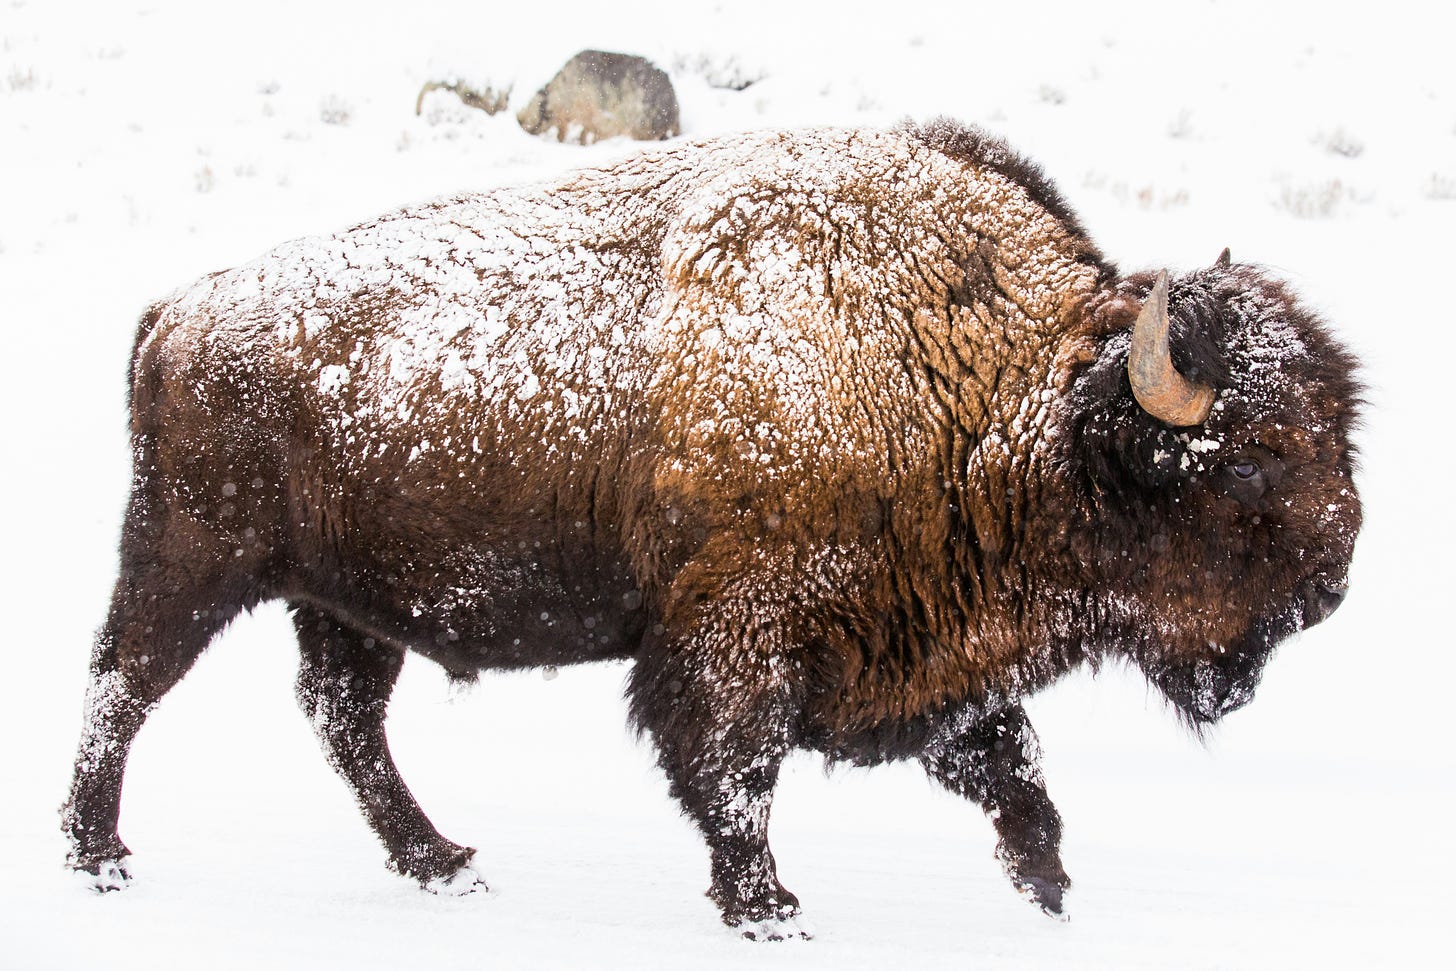 An American bison in a blizzard